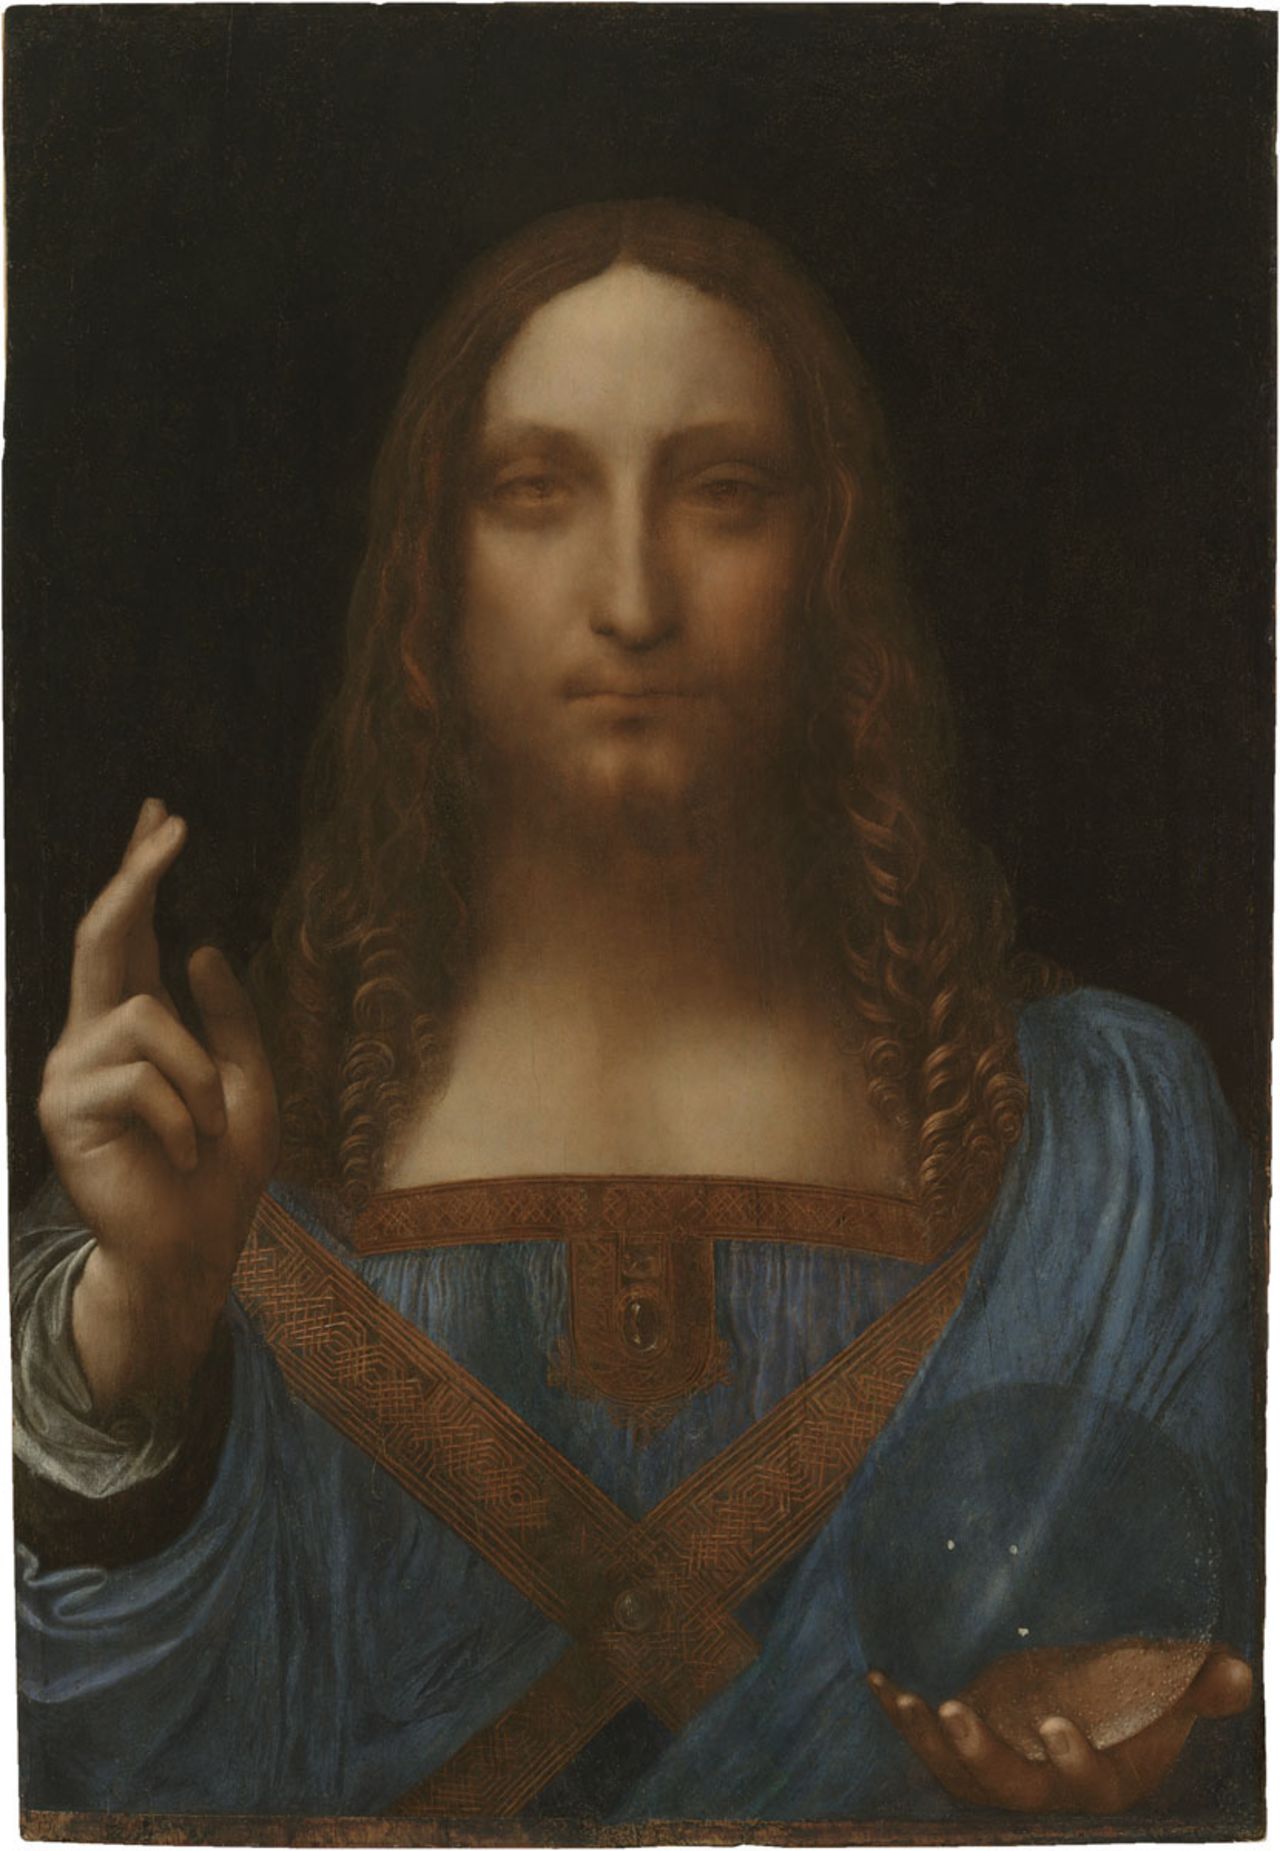 Leonardo da Vinci's "Salvator Mundi," c. 1500, was, for years, thought to have been destroyed. It was only re-discovered in the last five years and will go on public display for the first time in London in November.